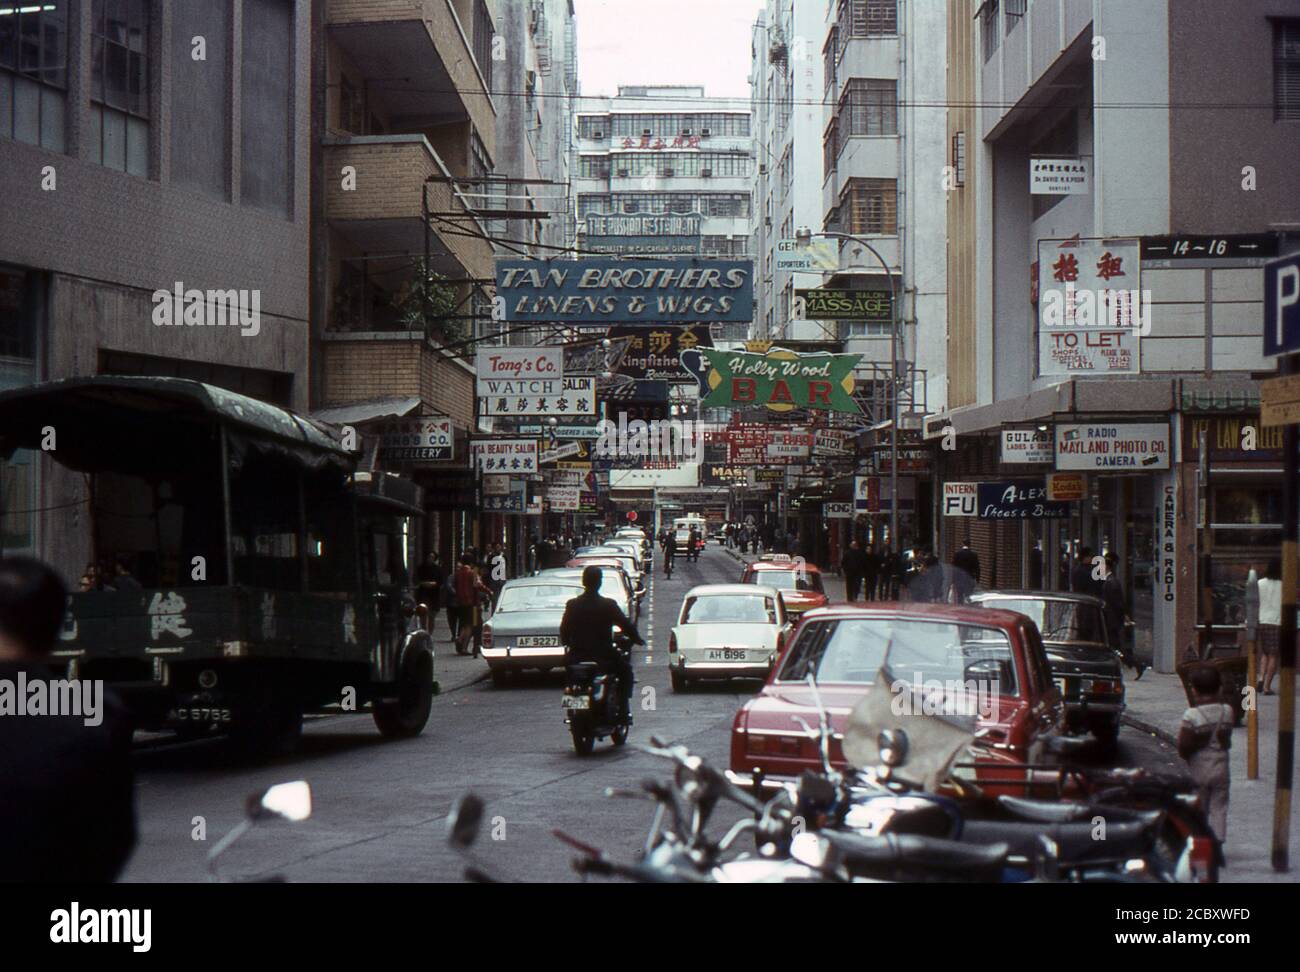 A busy street scene in Hong Kong. 1968. Humphreys Avenue, Kowloon. Advertising signs on buildings. Stock Photo